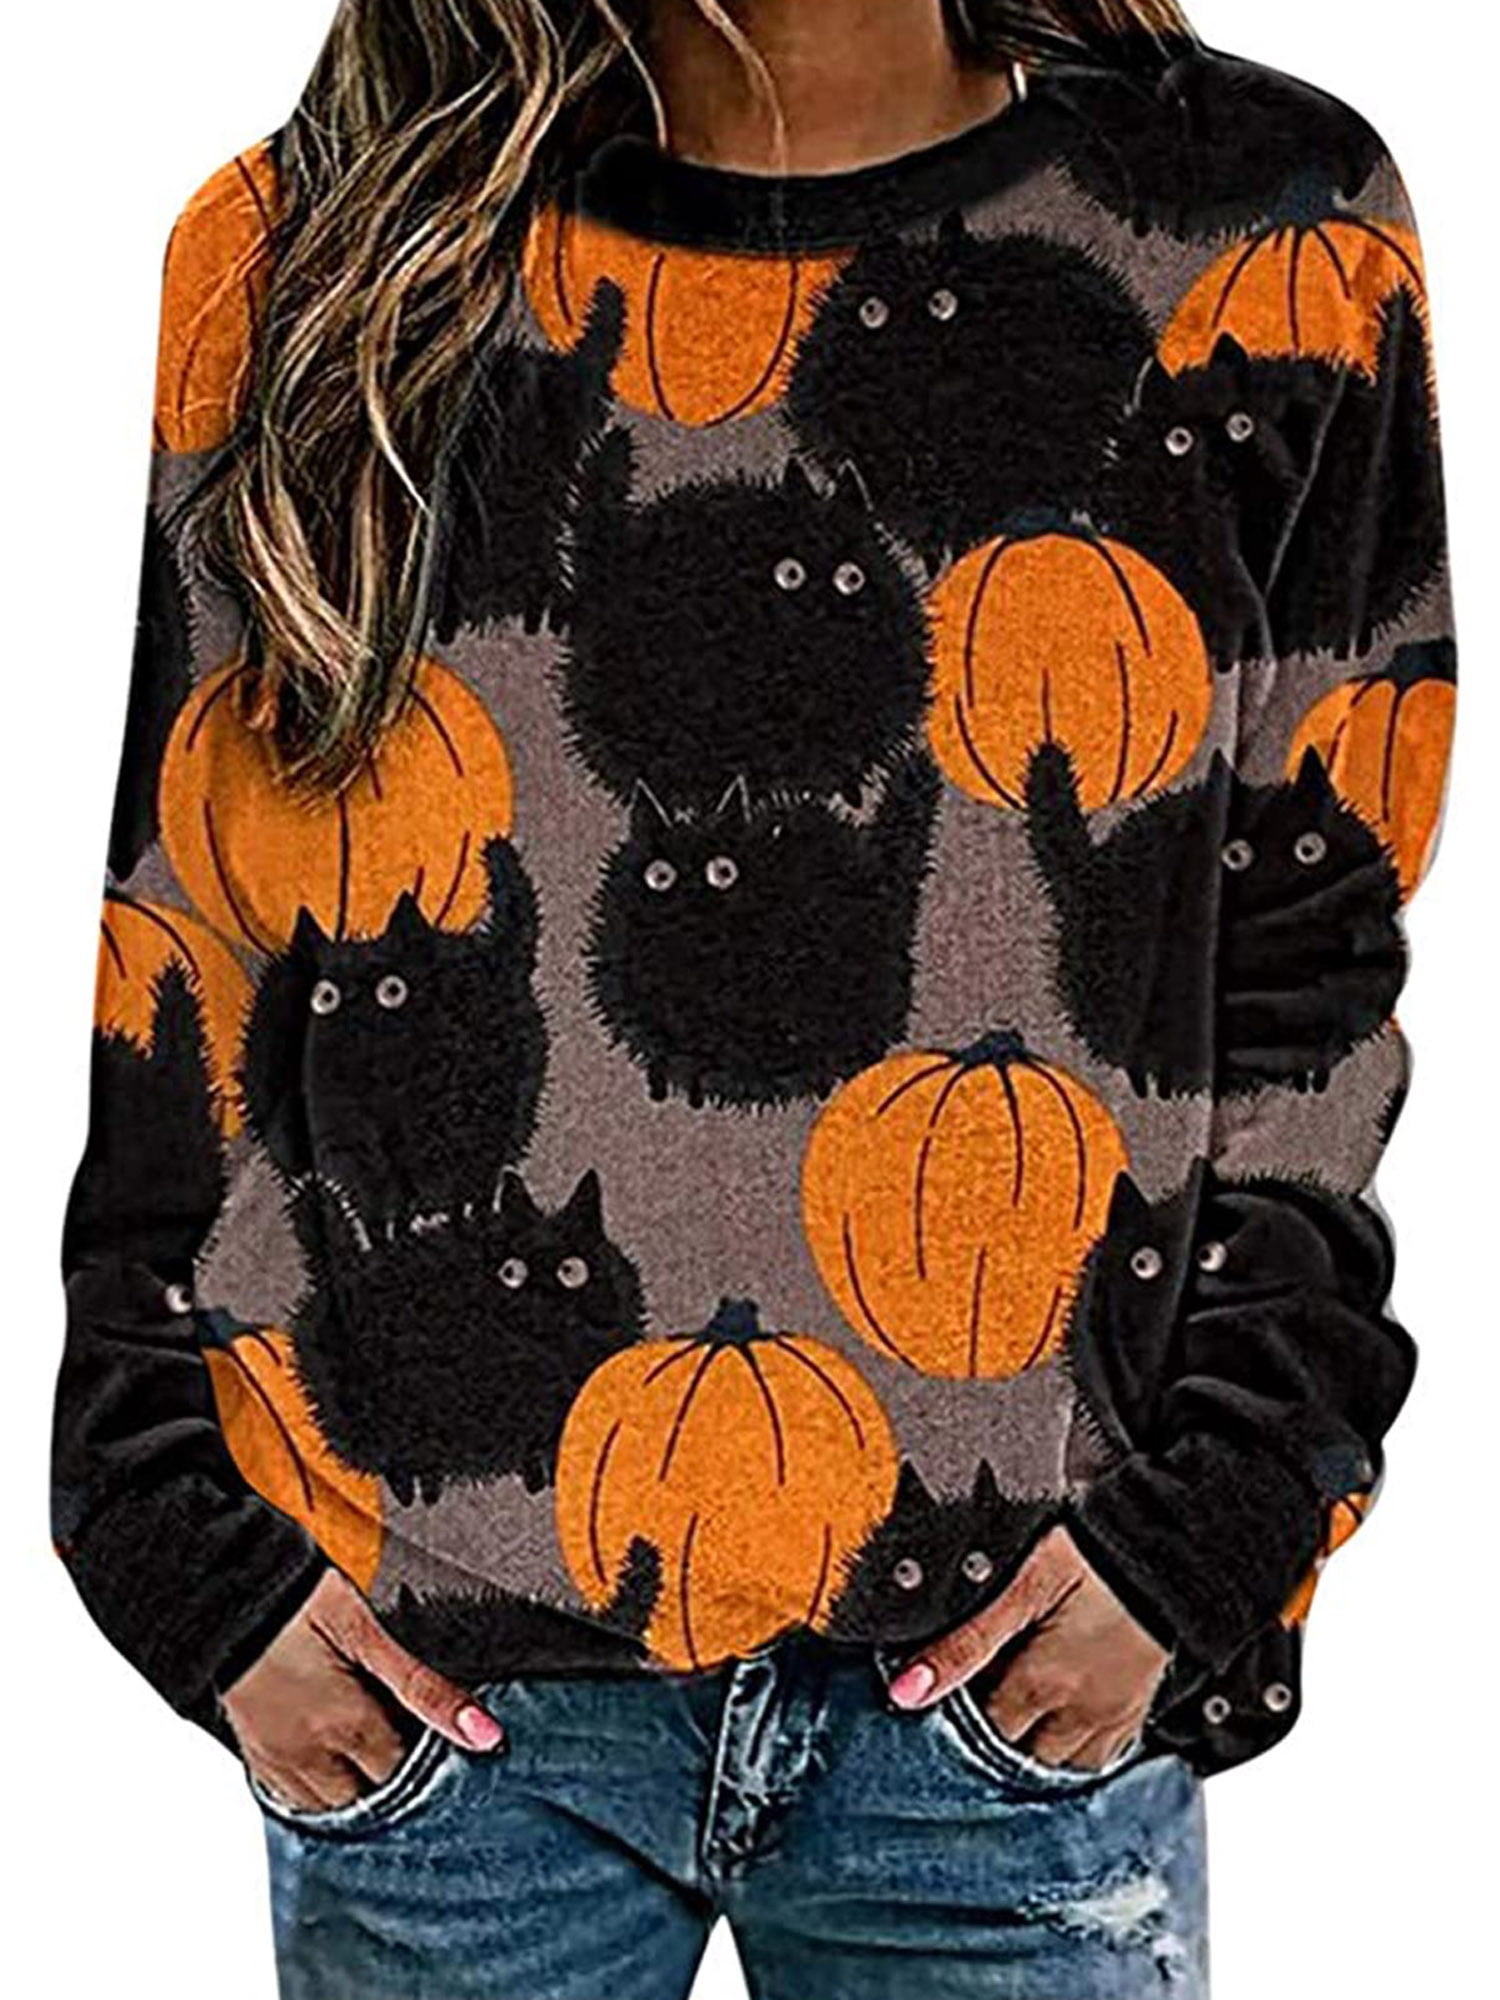 Women's Halloween Tops Casual Long Sleeve Tunic Crew Neck Print Sweatshirt Round Neck Pullover Plus Size Jumper Blouses Over Size Baseball Tee Shirts 